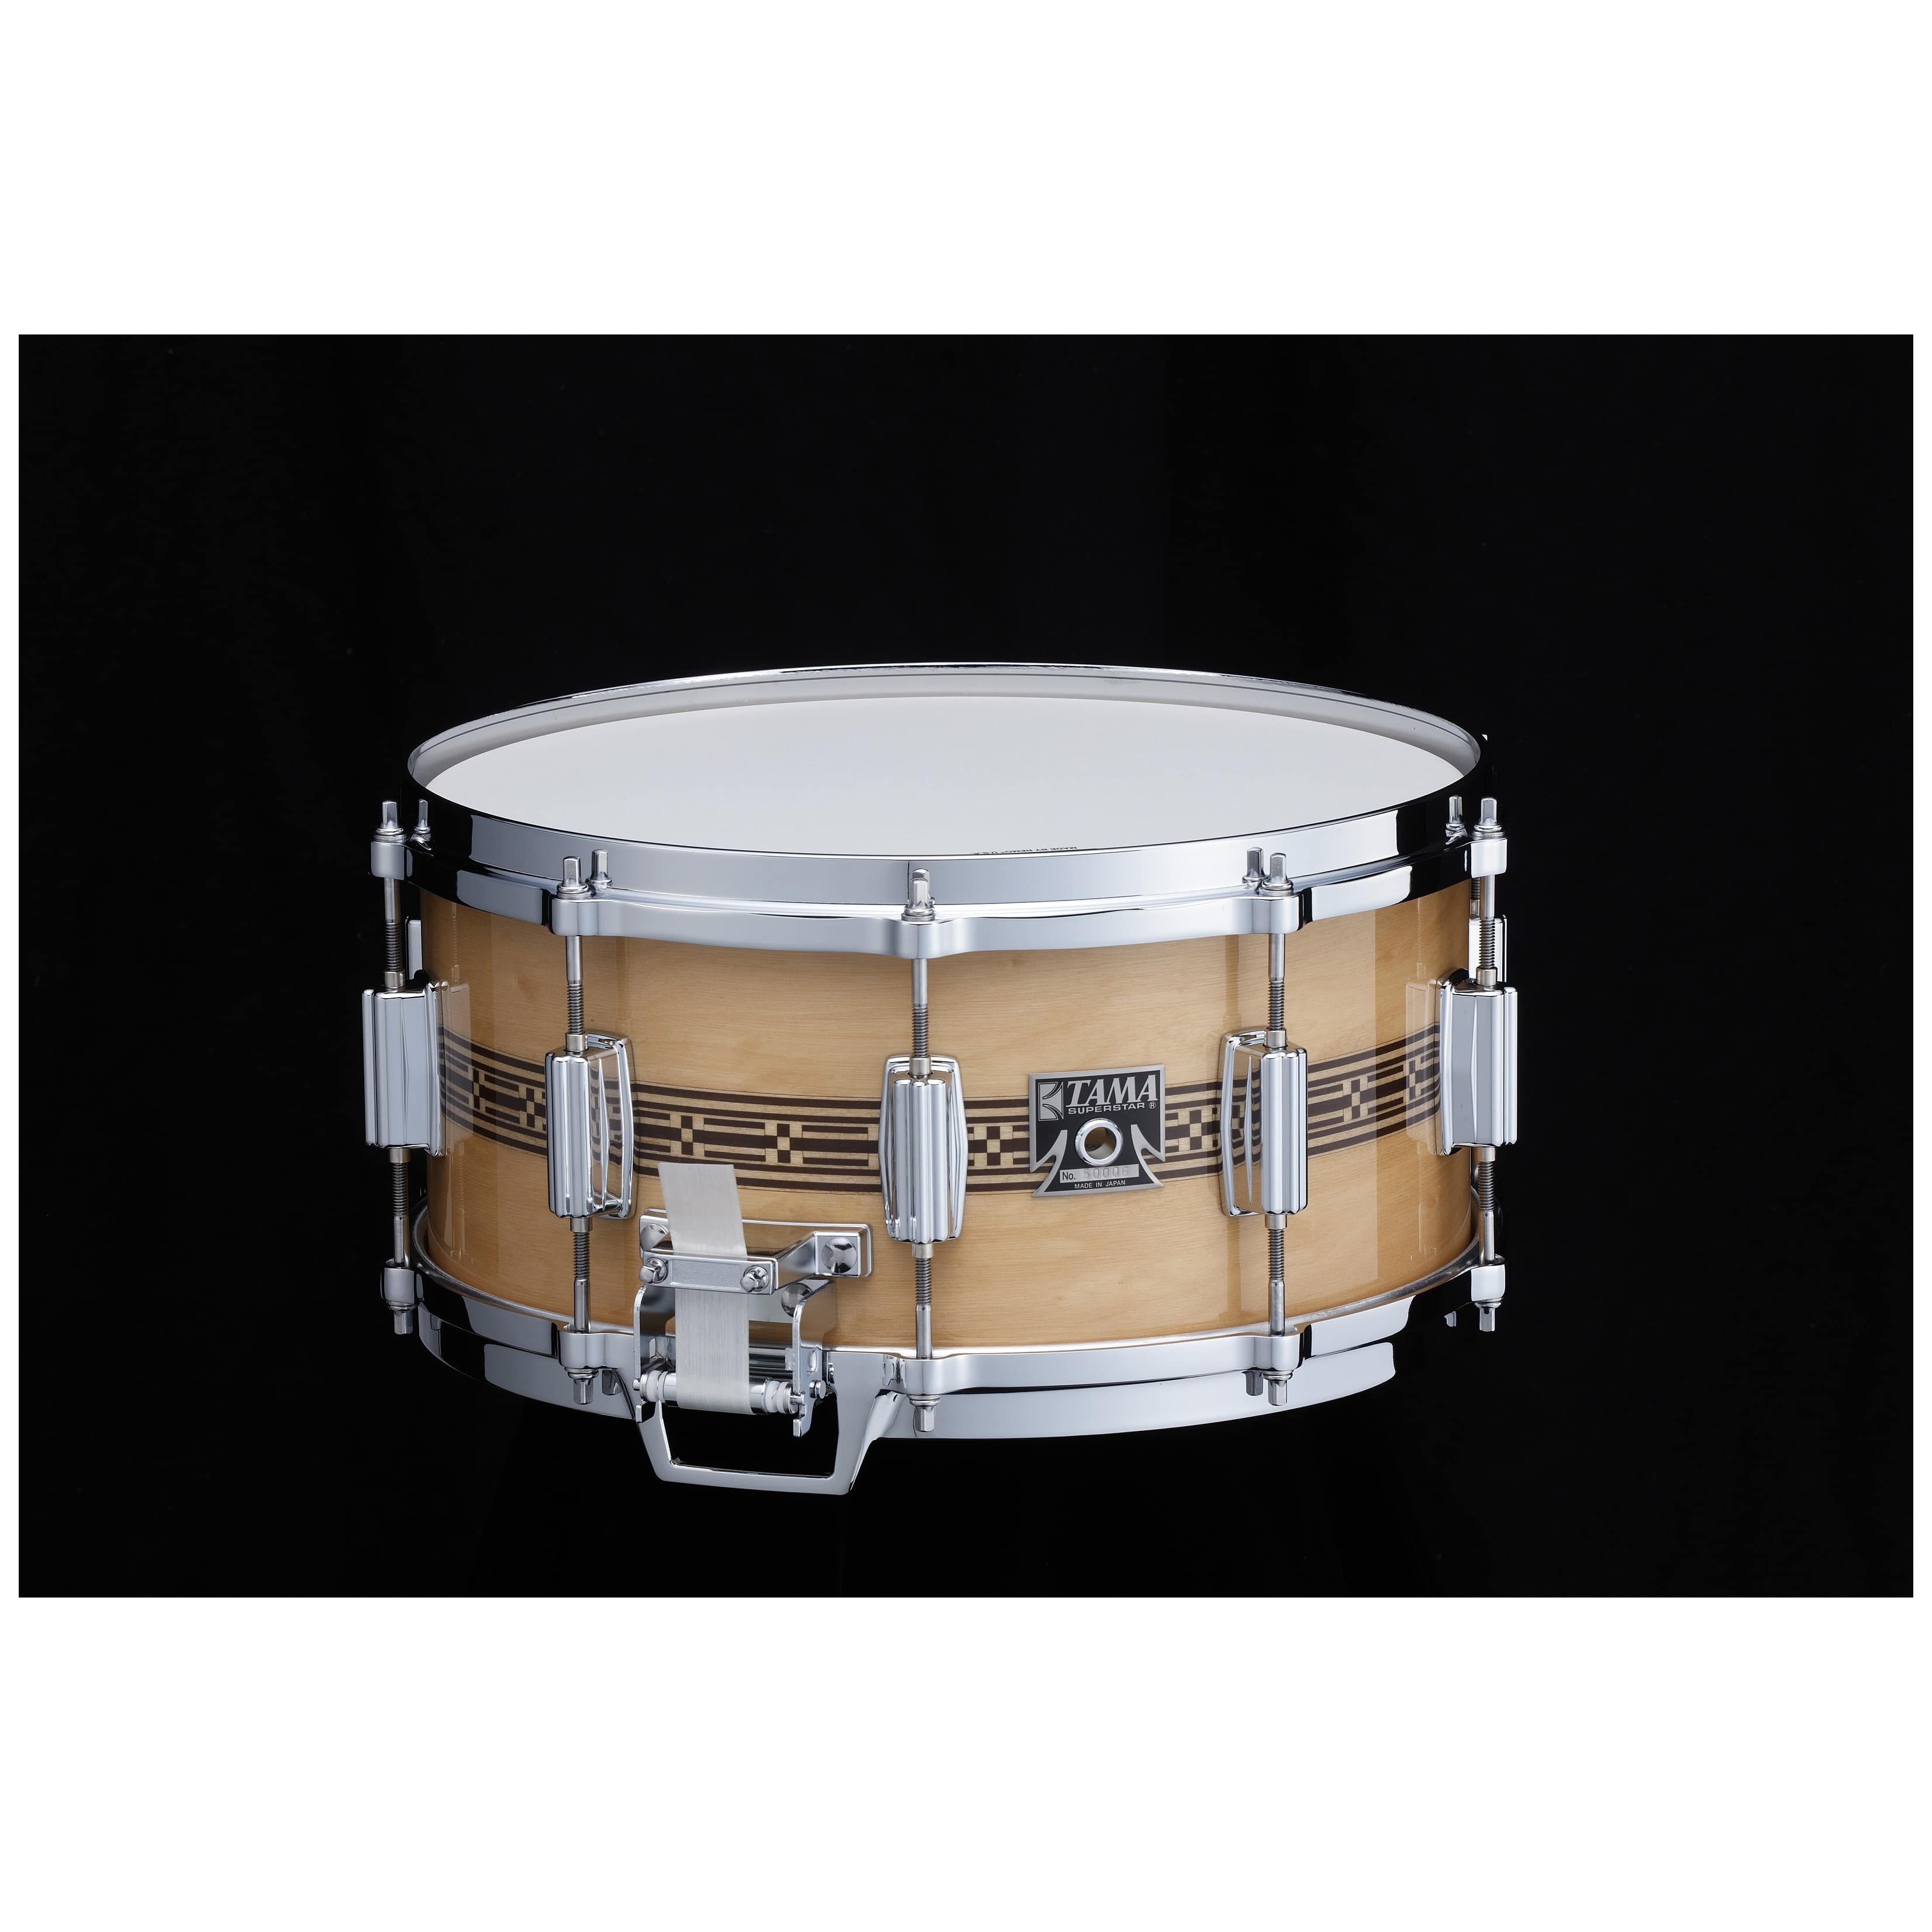 Tama AW-456 - 50th LIMITED Mastercraft Artwood Snare  Drum 14"x5" 1